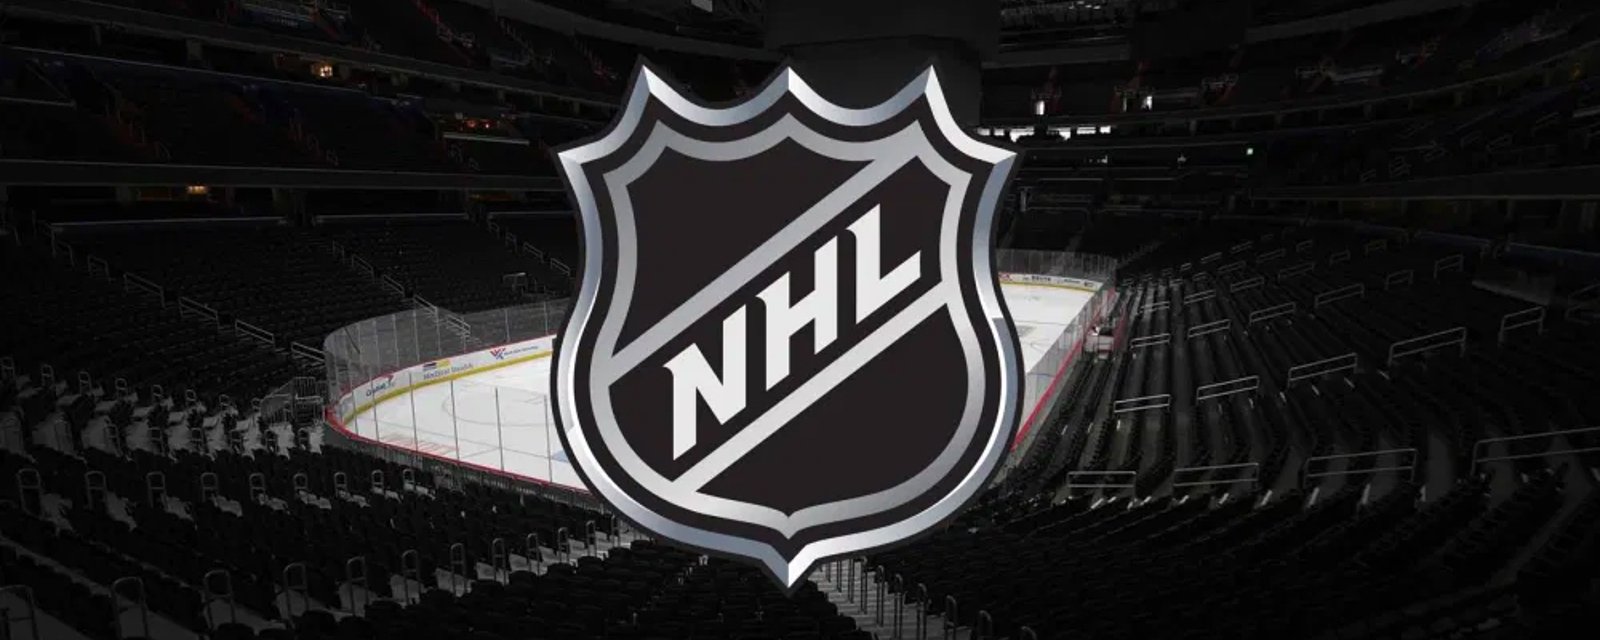 Report: Details of 2021 NHL schedule finally revealed